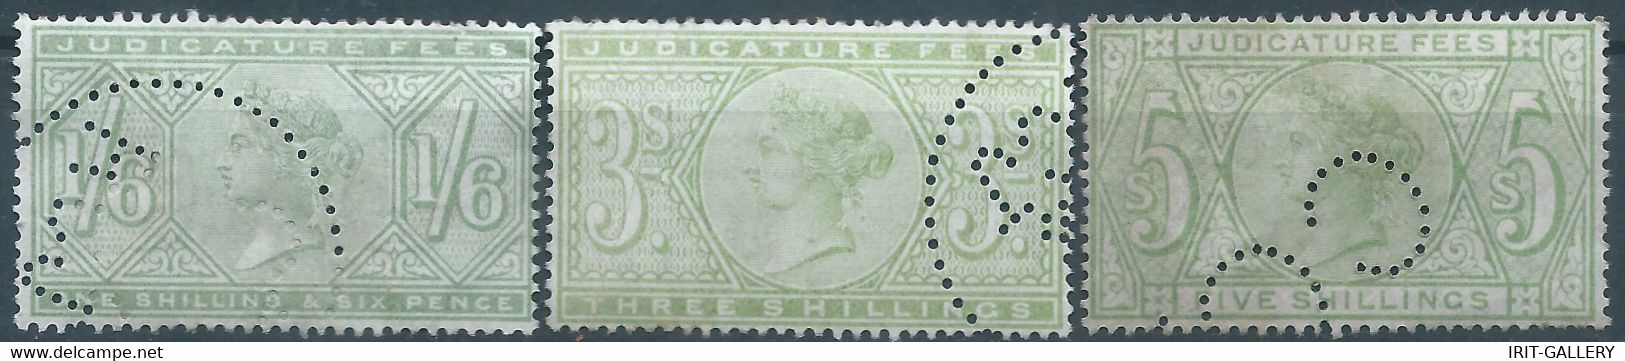 Great Britain-ENGLAND,Queen Victoria,1870-1800 Revenue Stamp Tax Fisca,JUDICATURE FEES,1/6-3-5 Shillings,PERFIN - Used - Fiscale Zegels